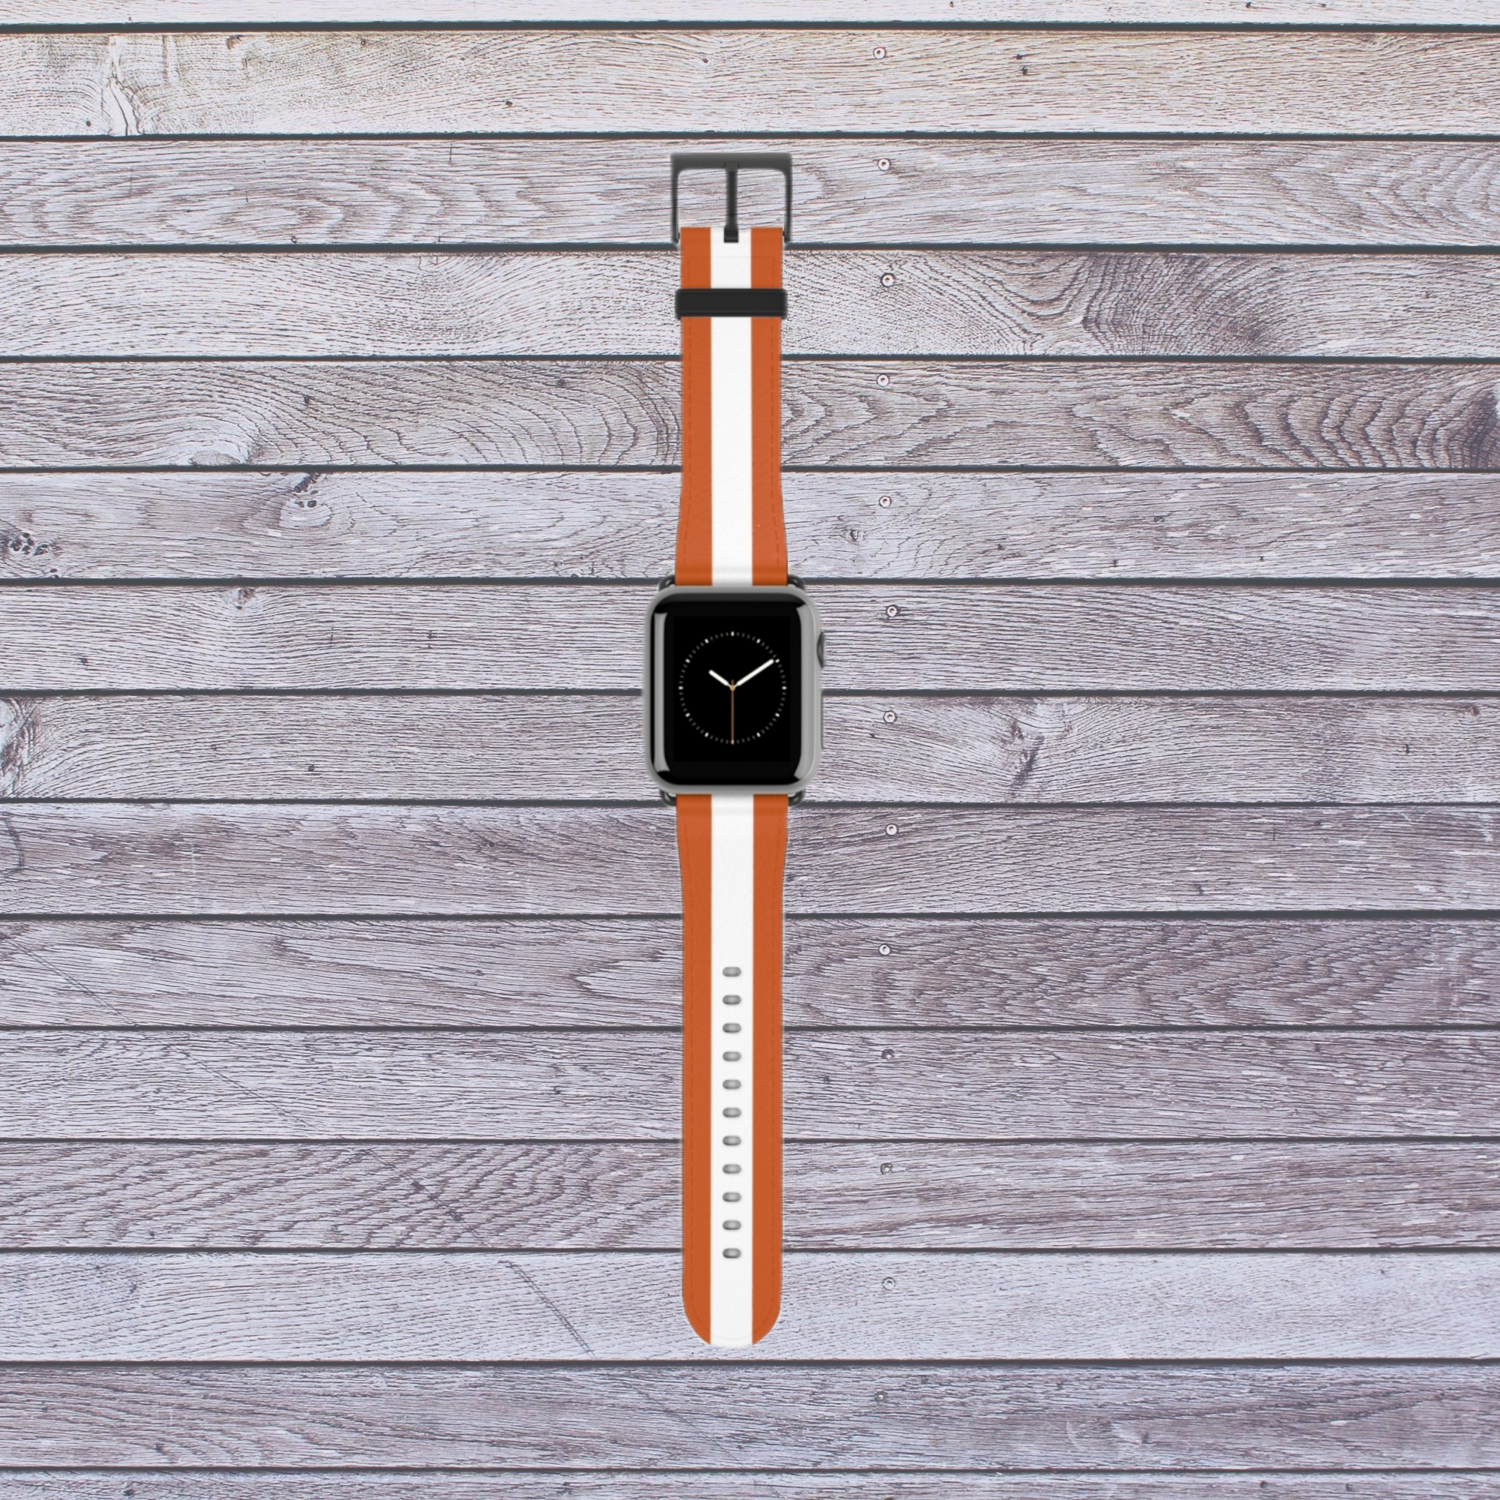 Burnt Orange and White Striped Apple Watch Band